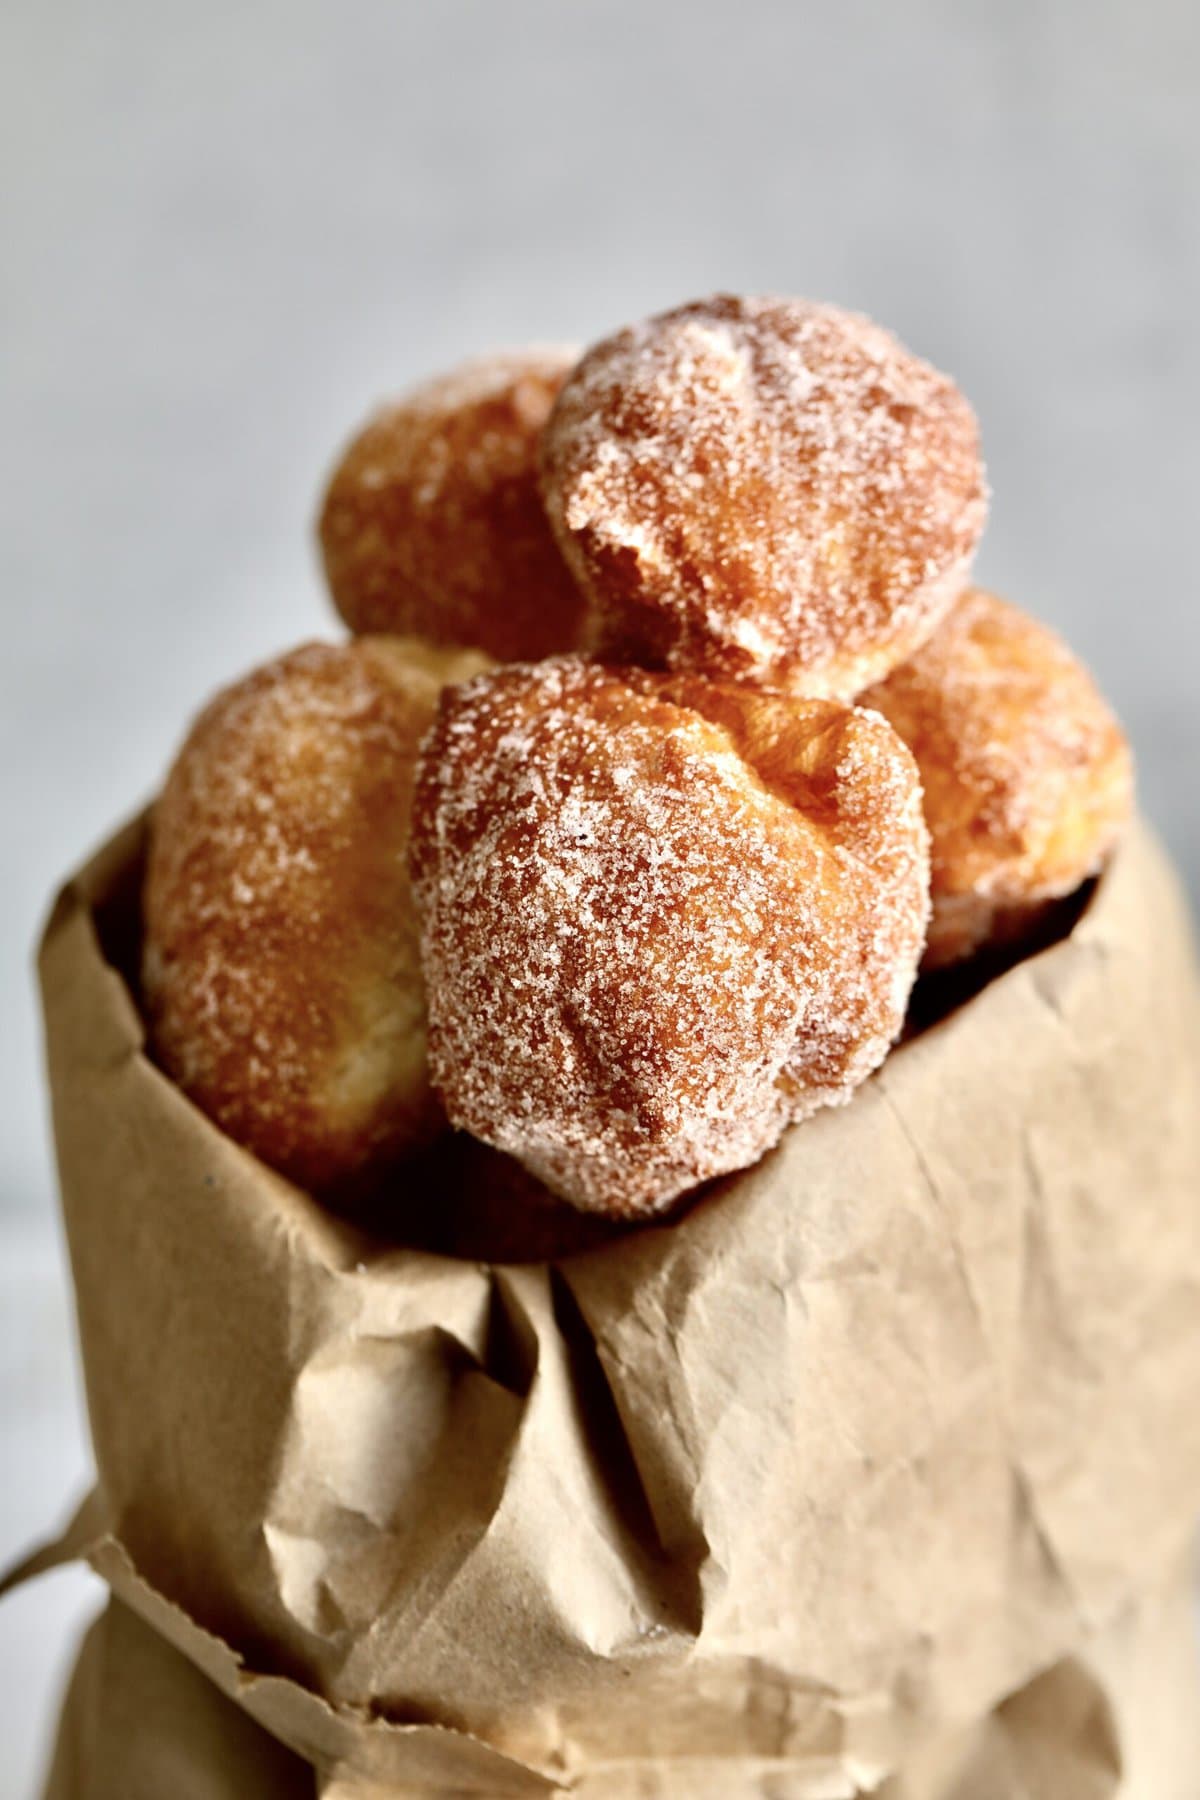 Zeppole Recipe (Easy Italian Donuts)zeppole coming out of brown paper bag.